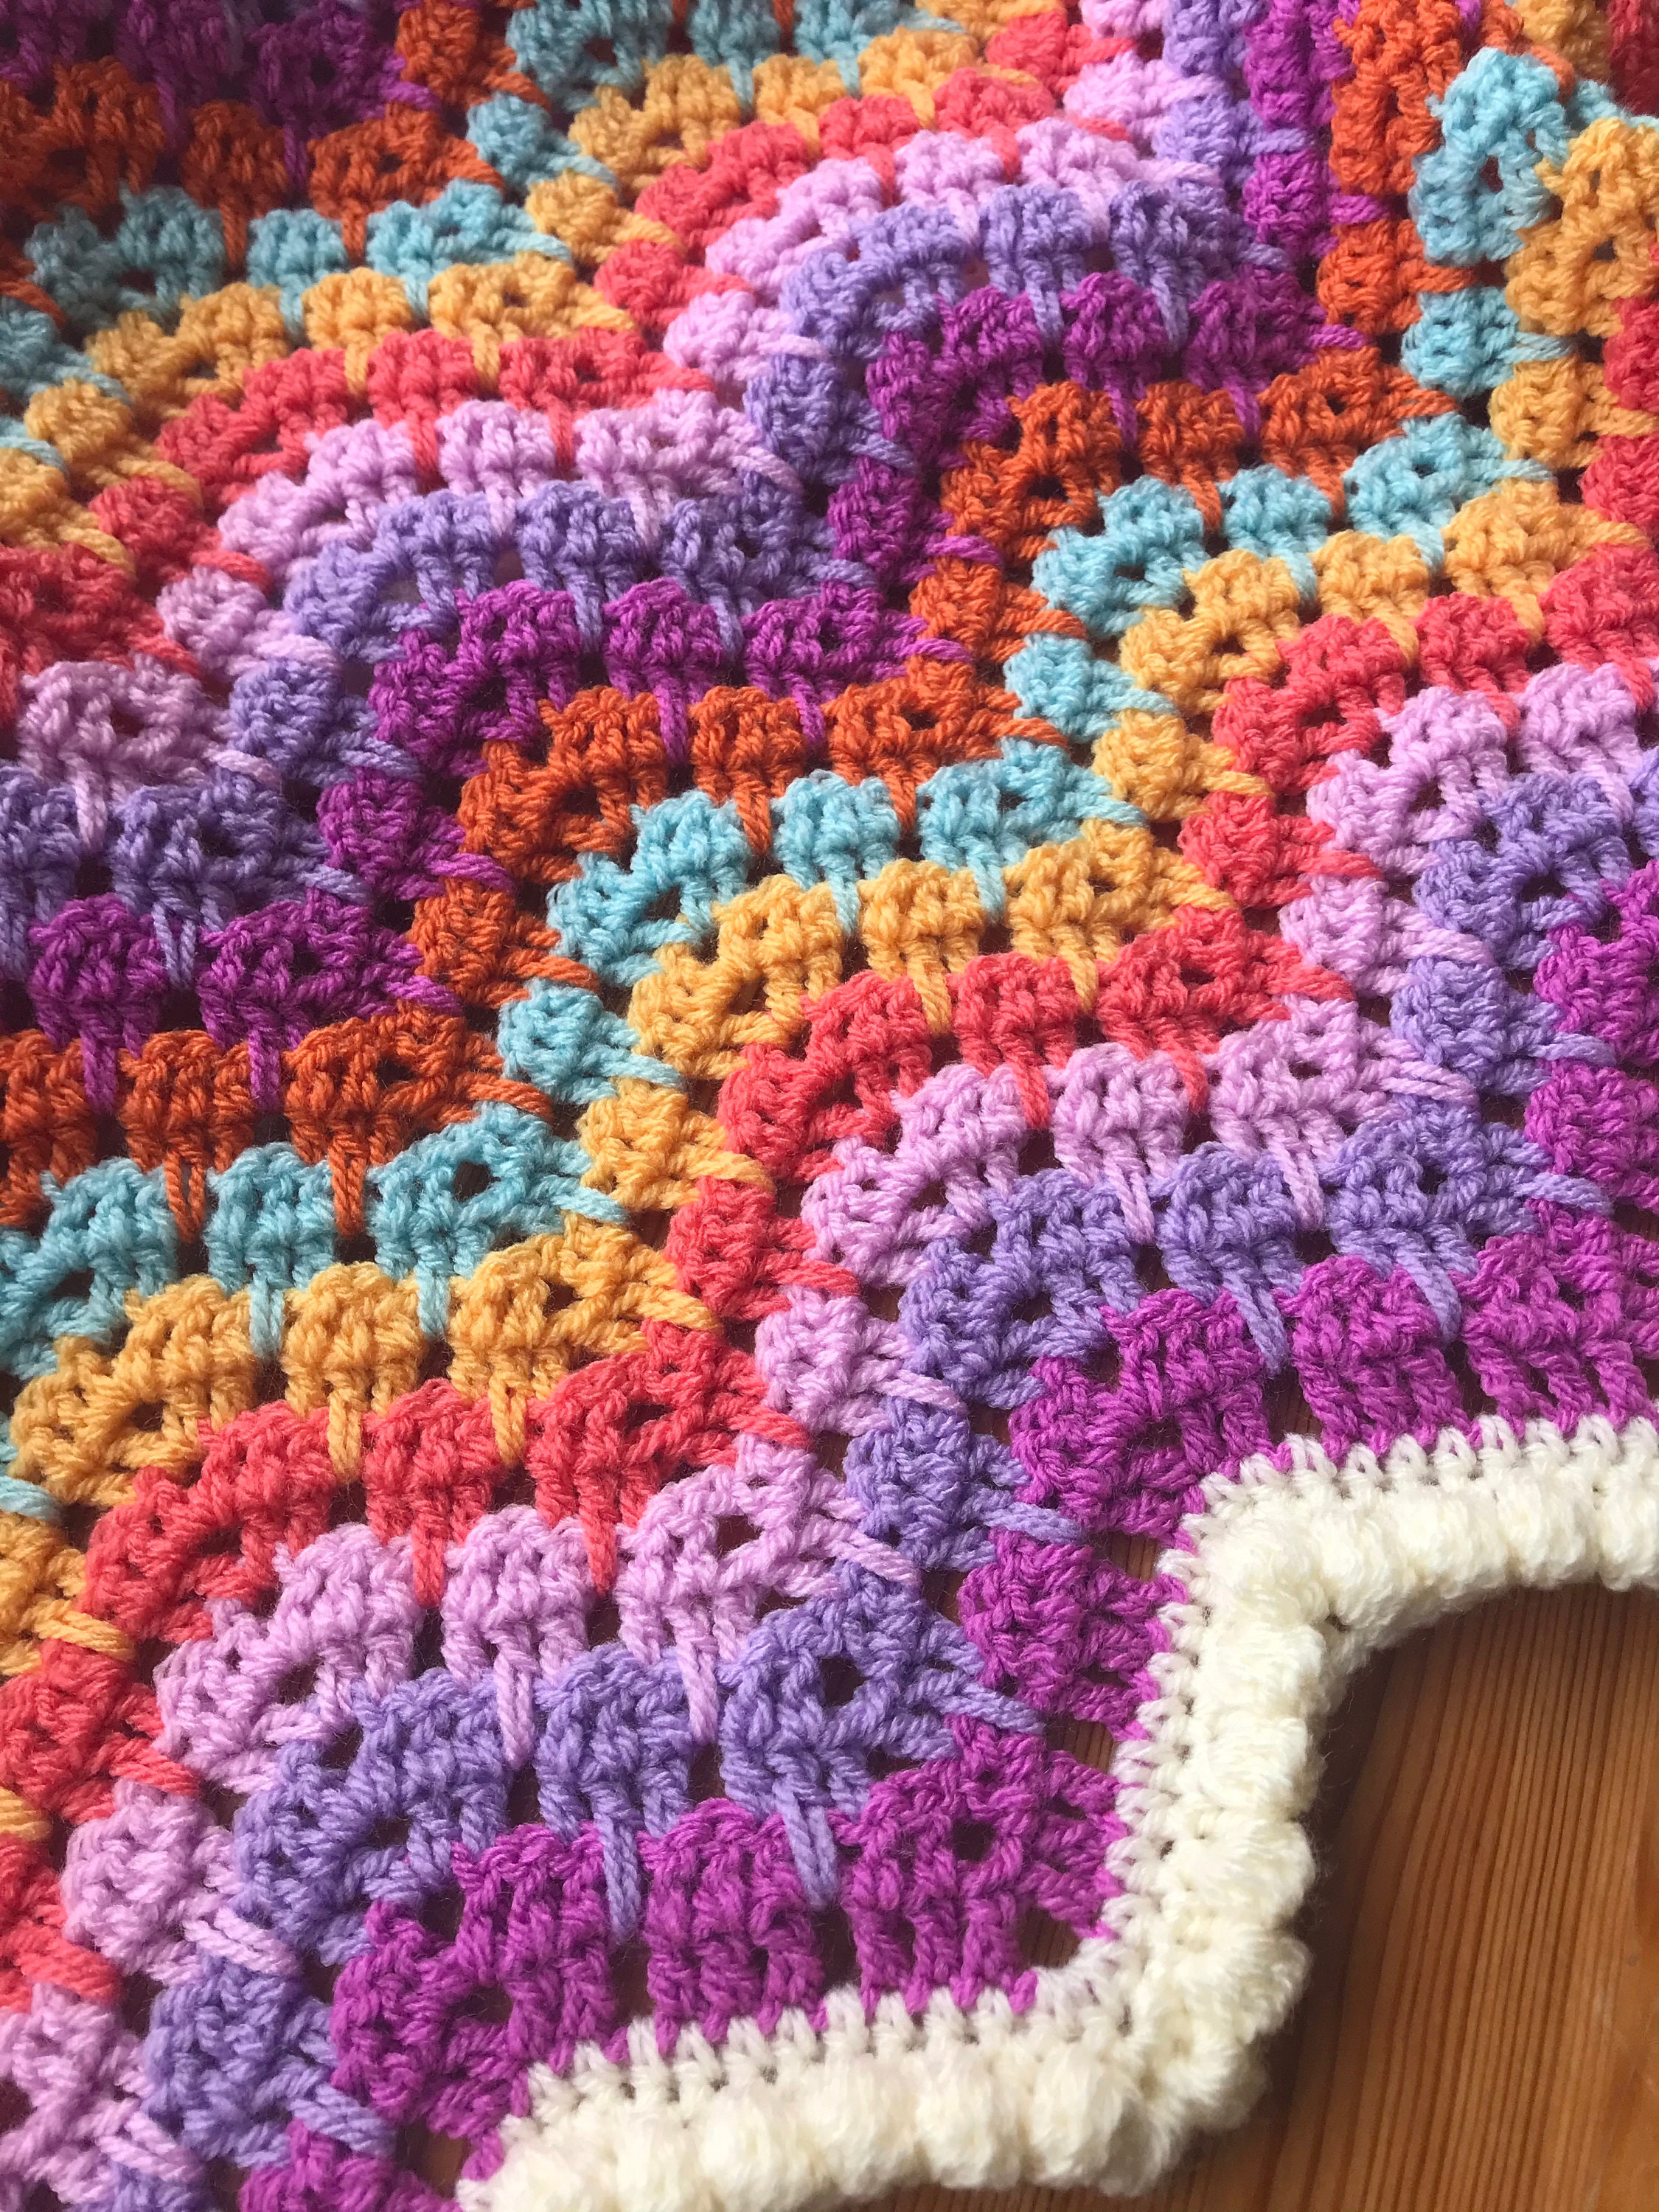 Ravelry: Variegated Granny Square pattern by Isabeau Suro